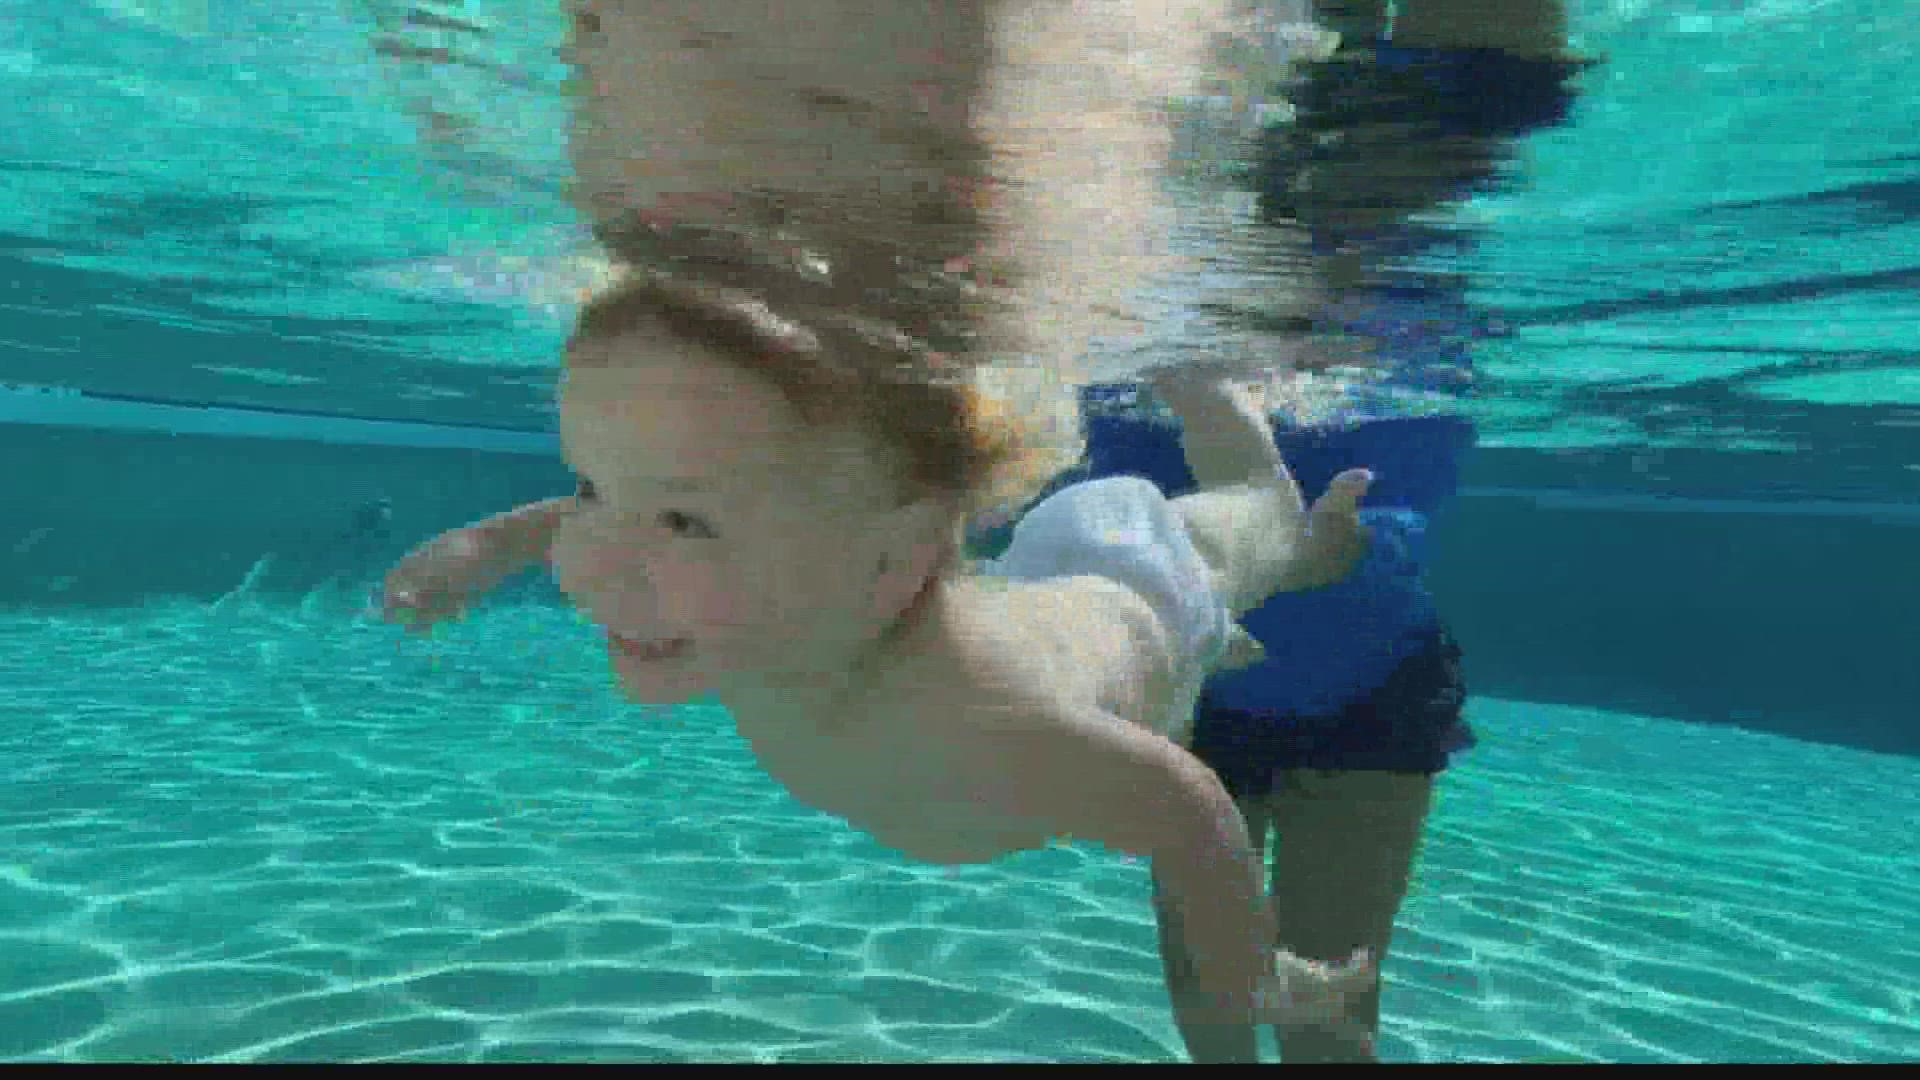 With drownings on the rise, and temperatures heating up, some people say swimming lessons should be essential.